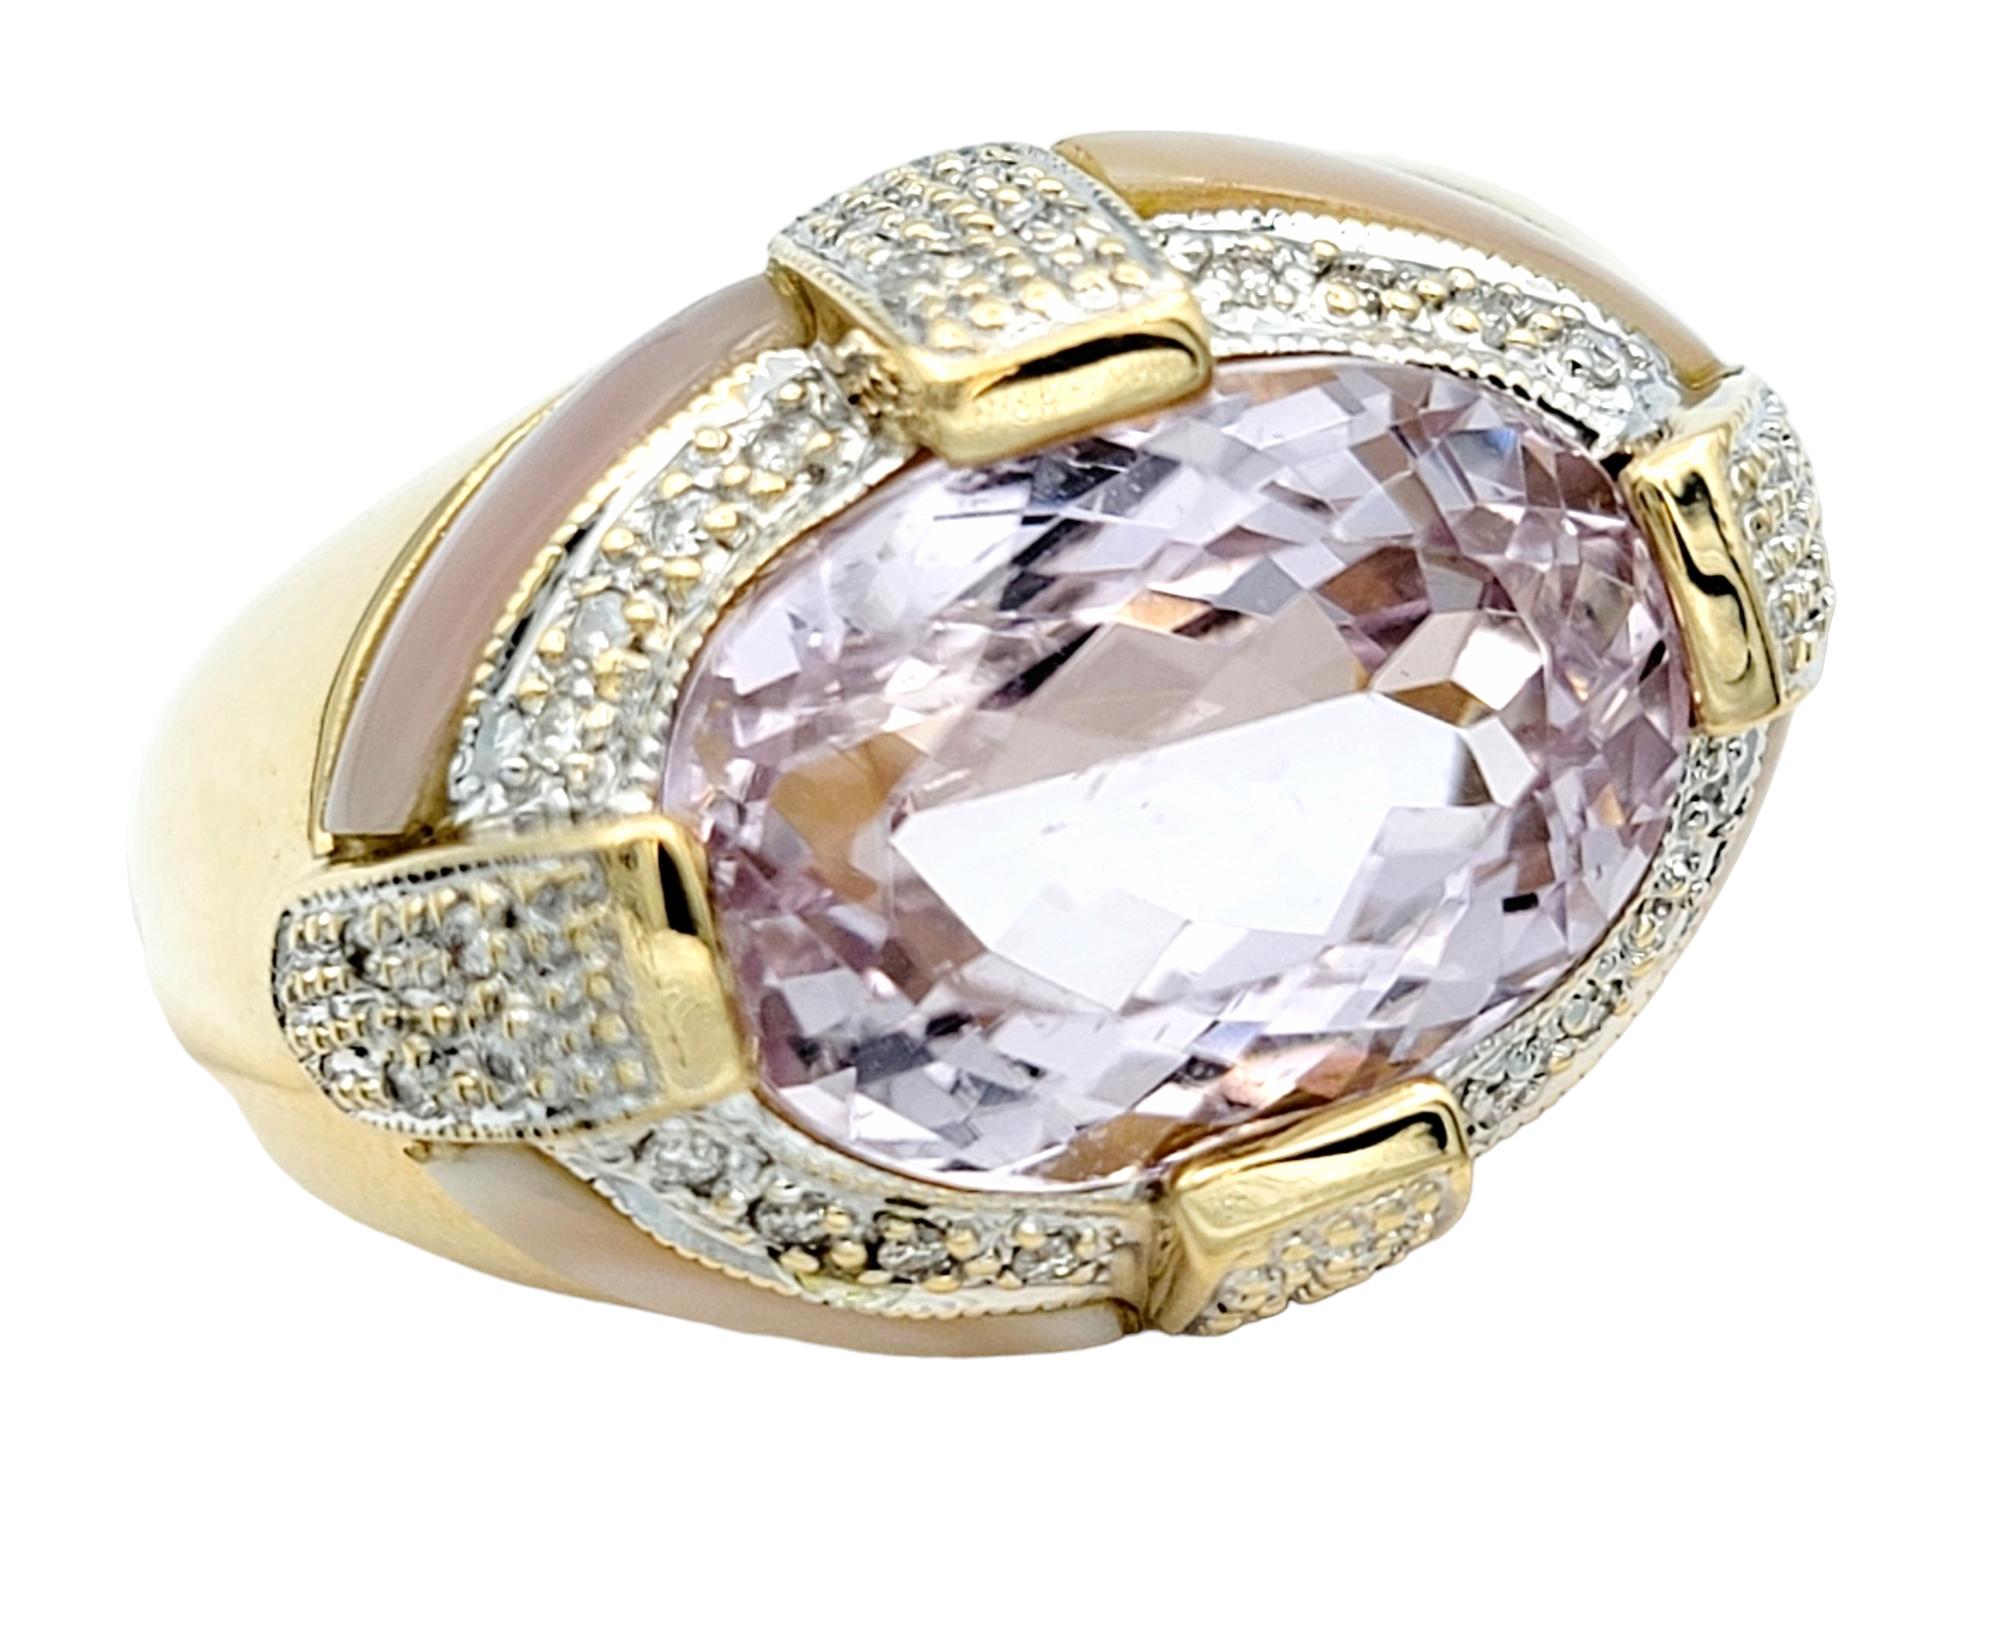 Ring size: 8

This resplendent cocktail ring exudes an aura of femininity and is a true masterpiece in design. At its core lies a magnificent 7.14 carat horizontally set oval-cut light pink kunzite, its gentle hue like a soft whisper of elegance.